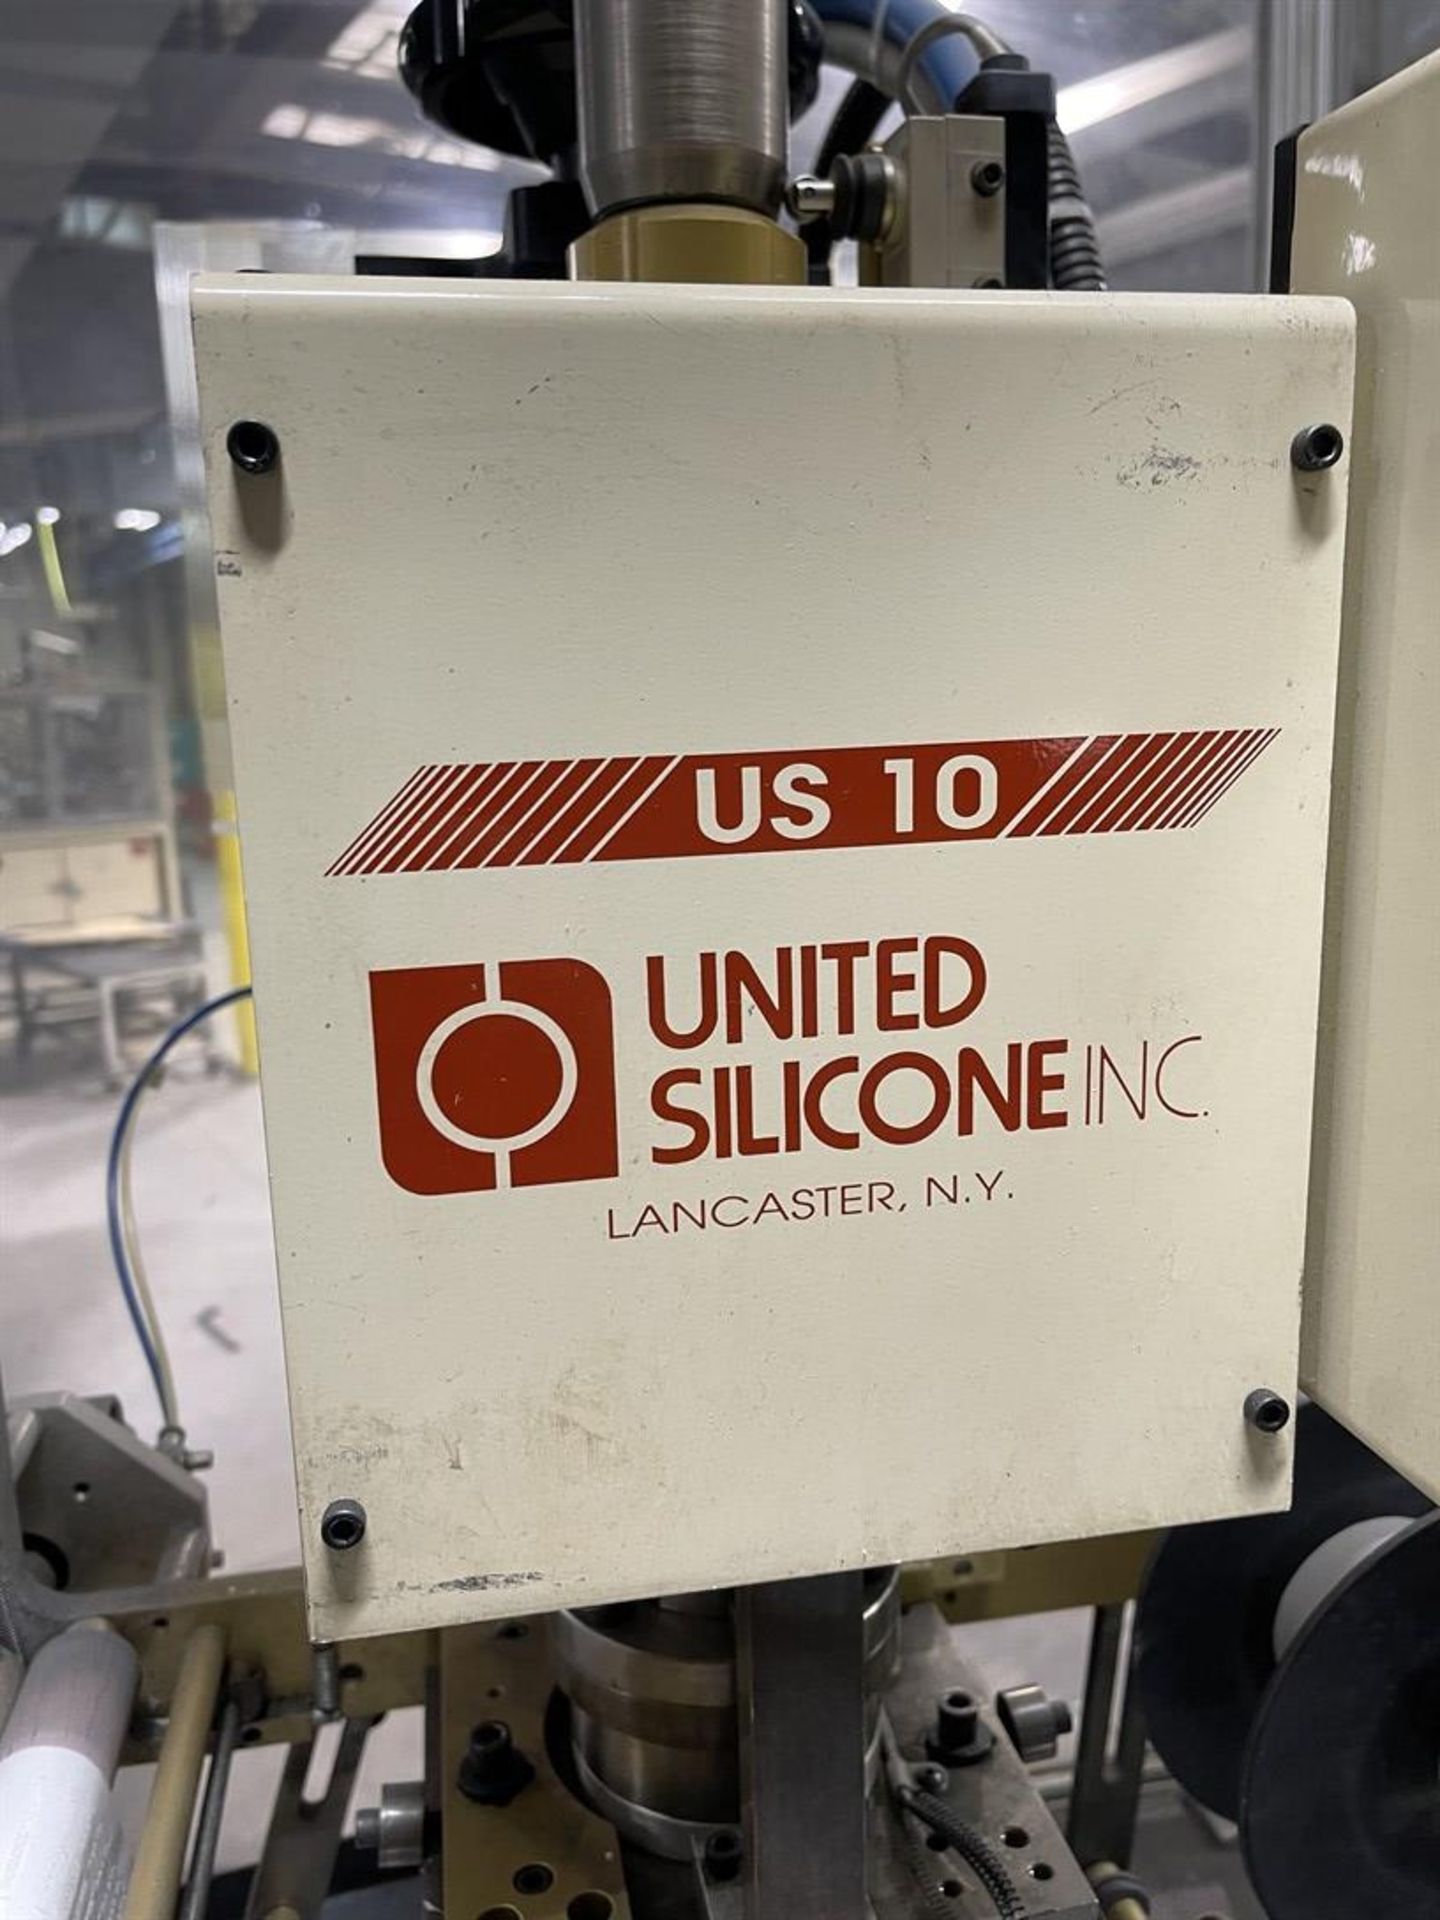 United Silicone US10 Stamping Machine, s/n 237471-1297, w/ UniOp Control - Image 6 of 6